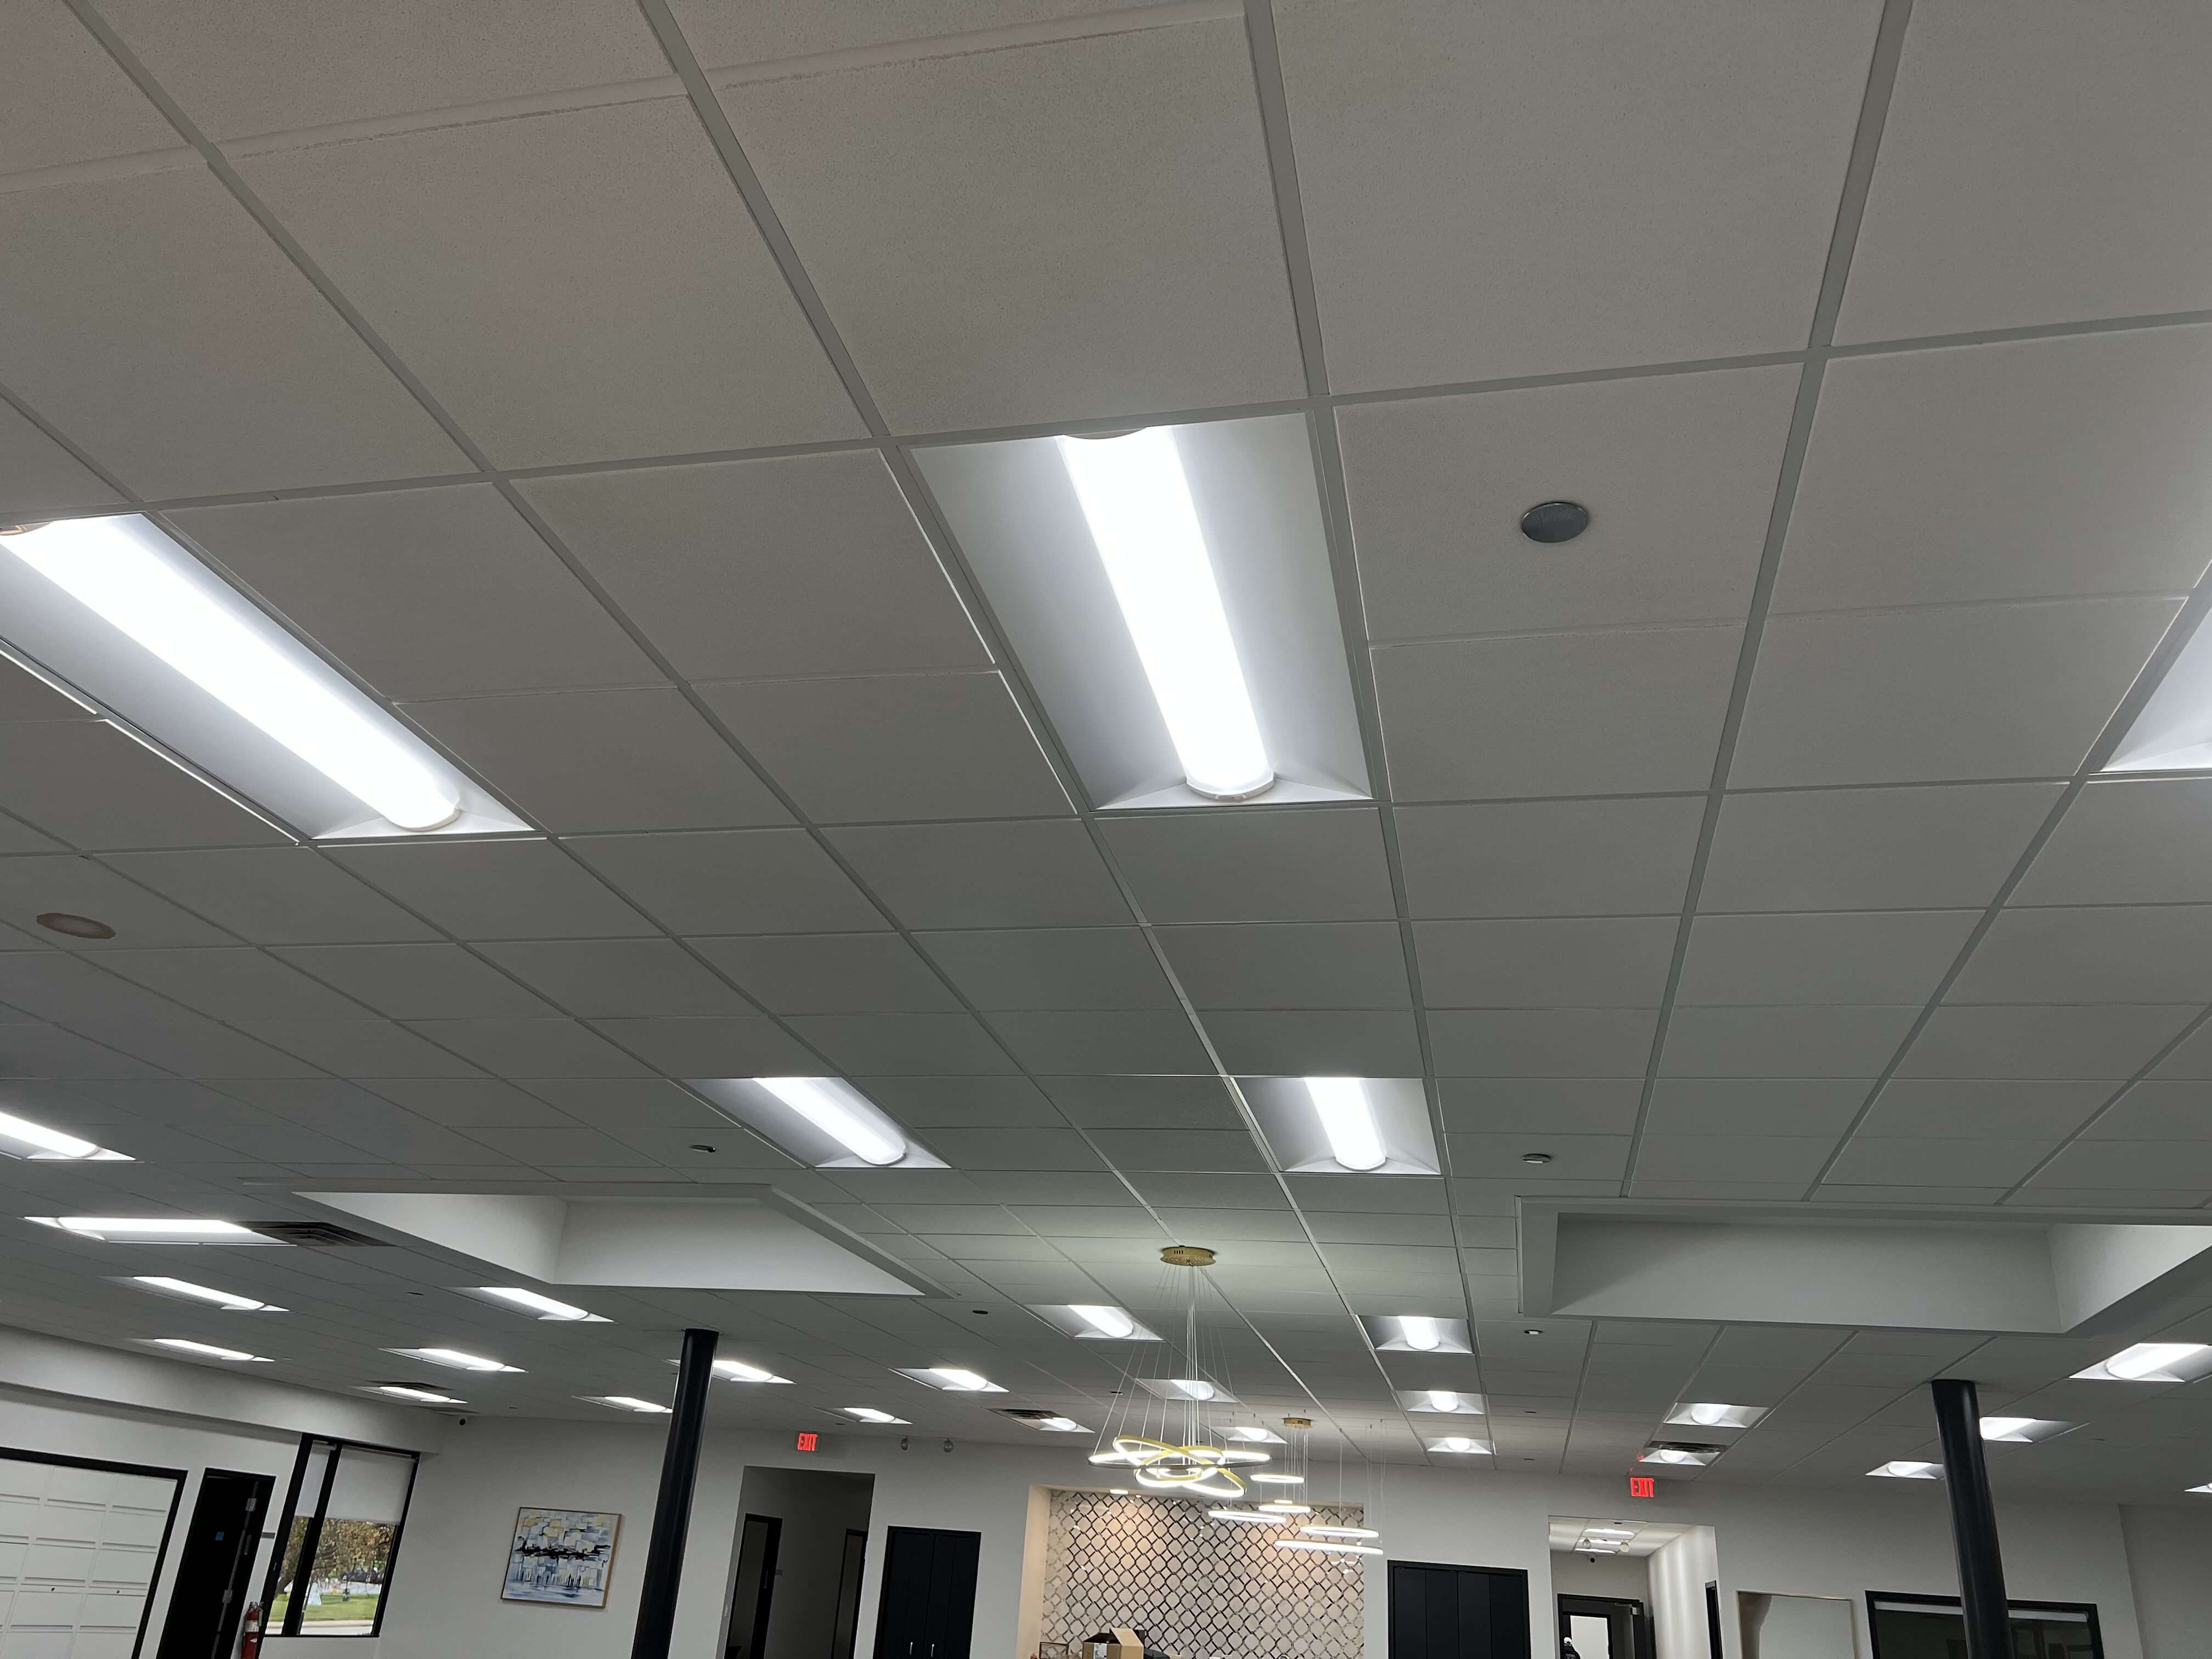 LED troffer lights in workplace | Office Lighting project